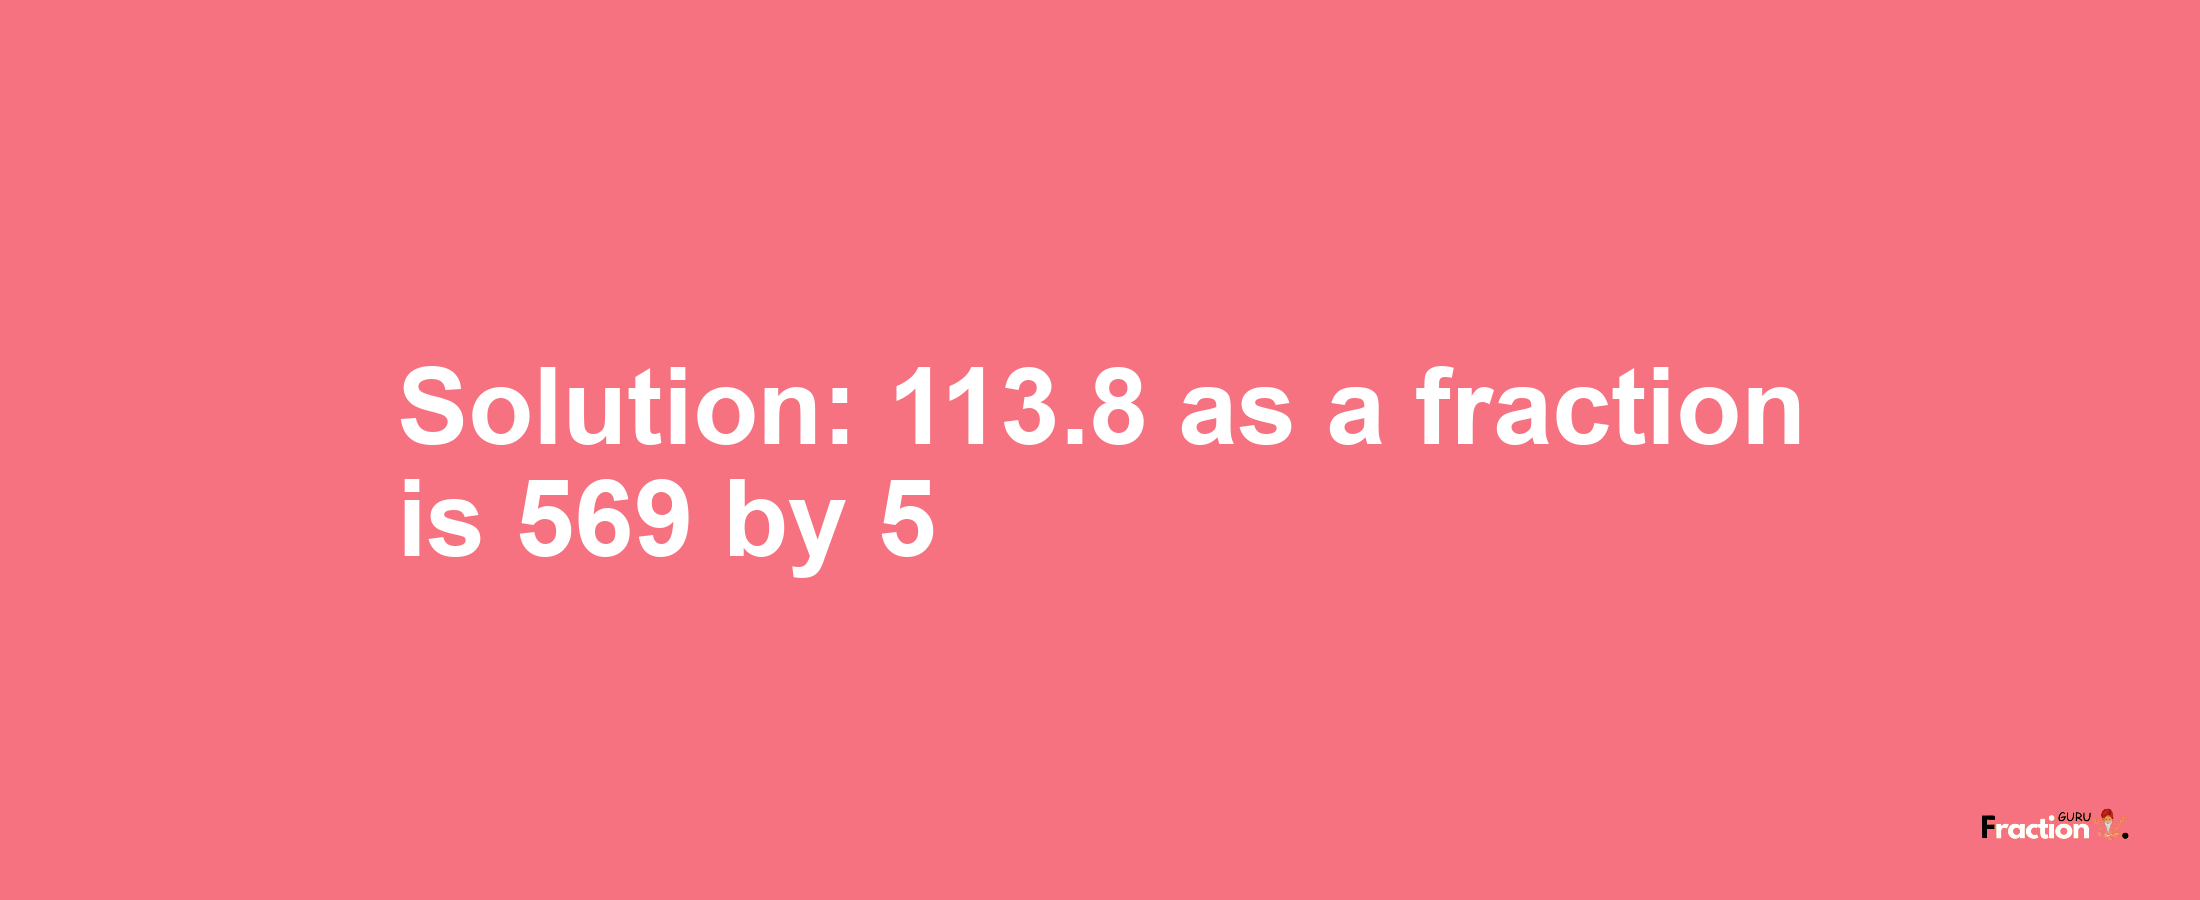 Solution:113.8 as a fraction is 569/5